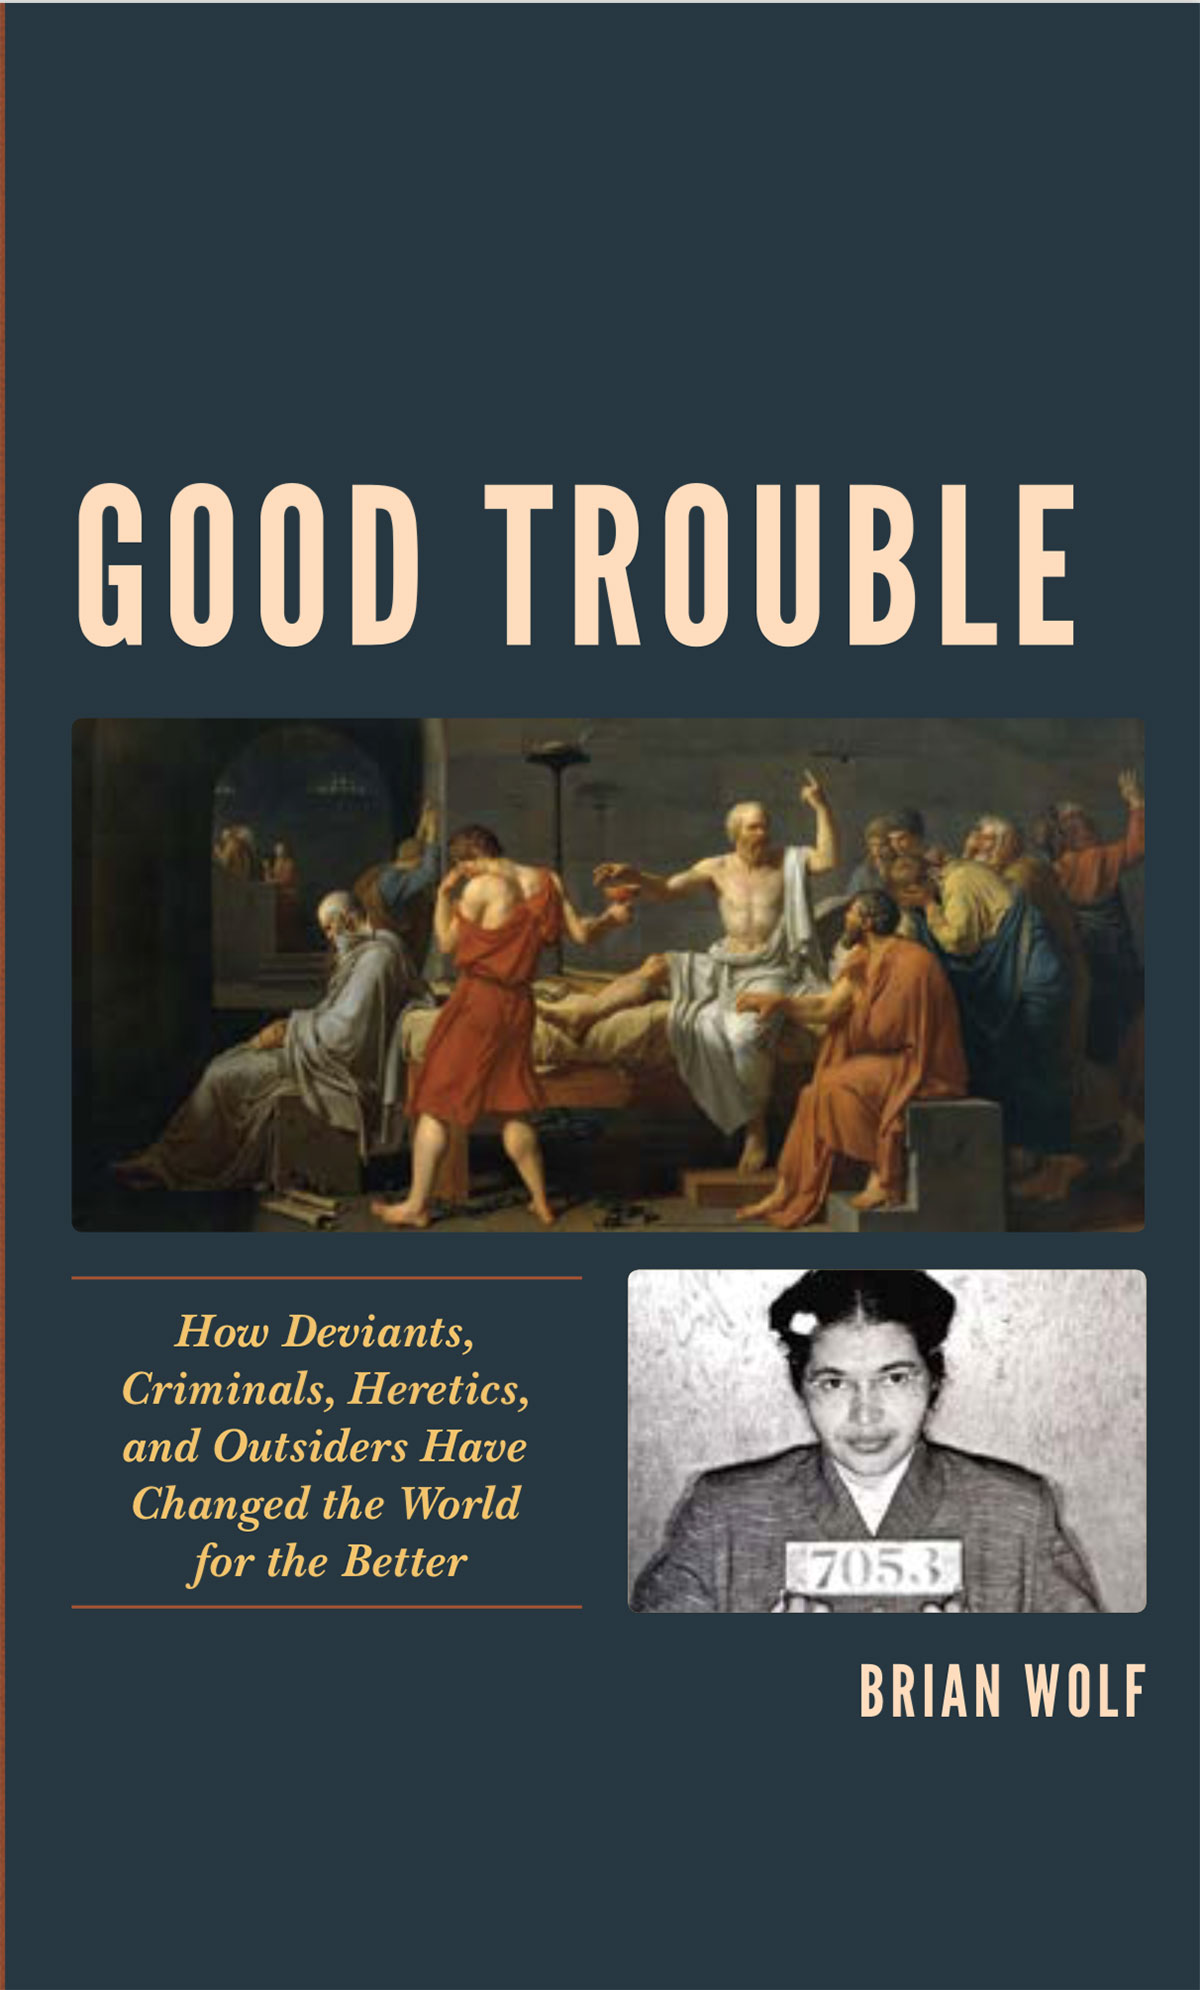 Cover of "Good Trouble" by Brian Wolf.